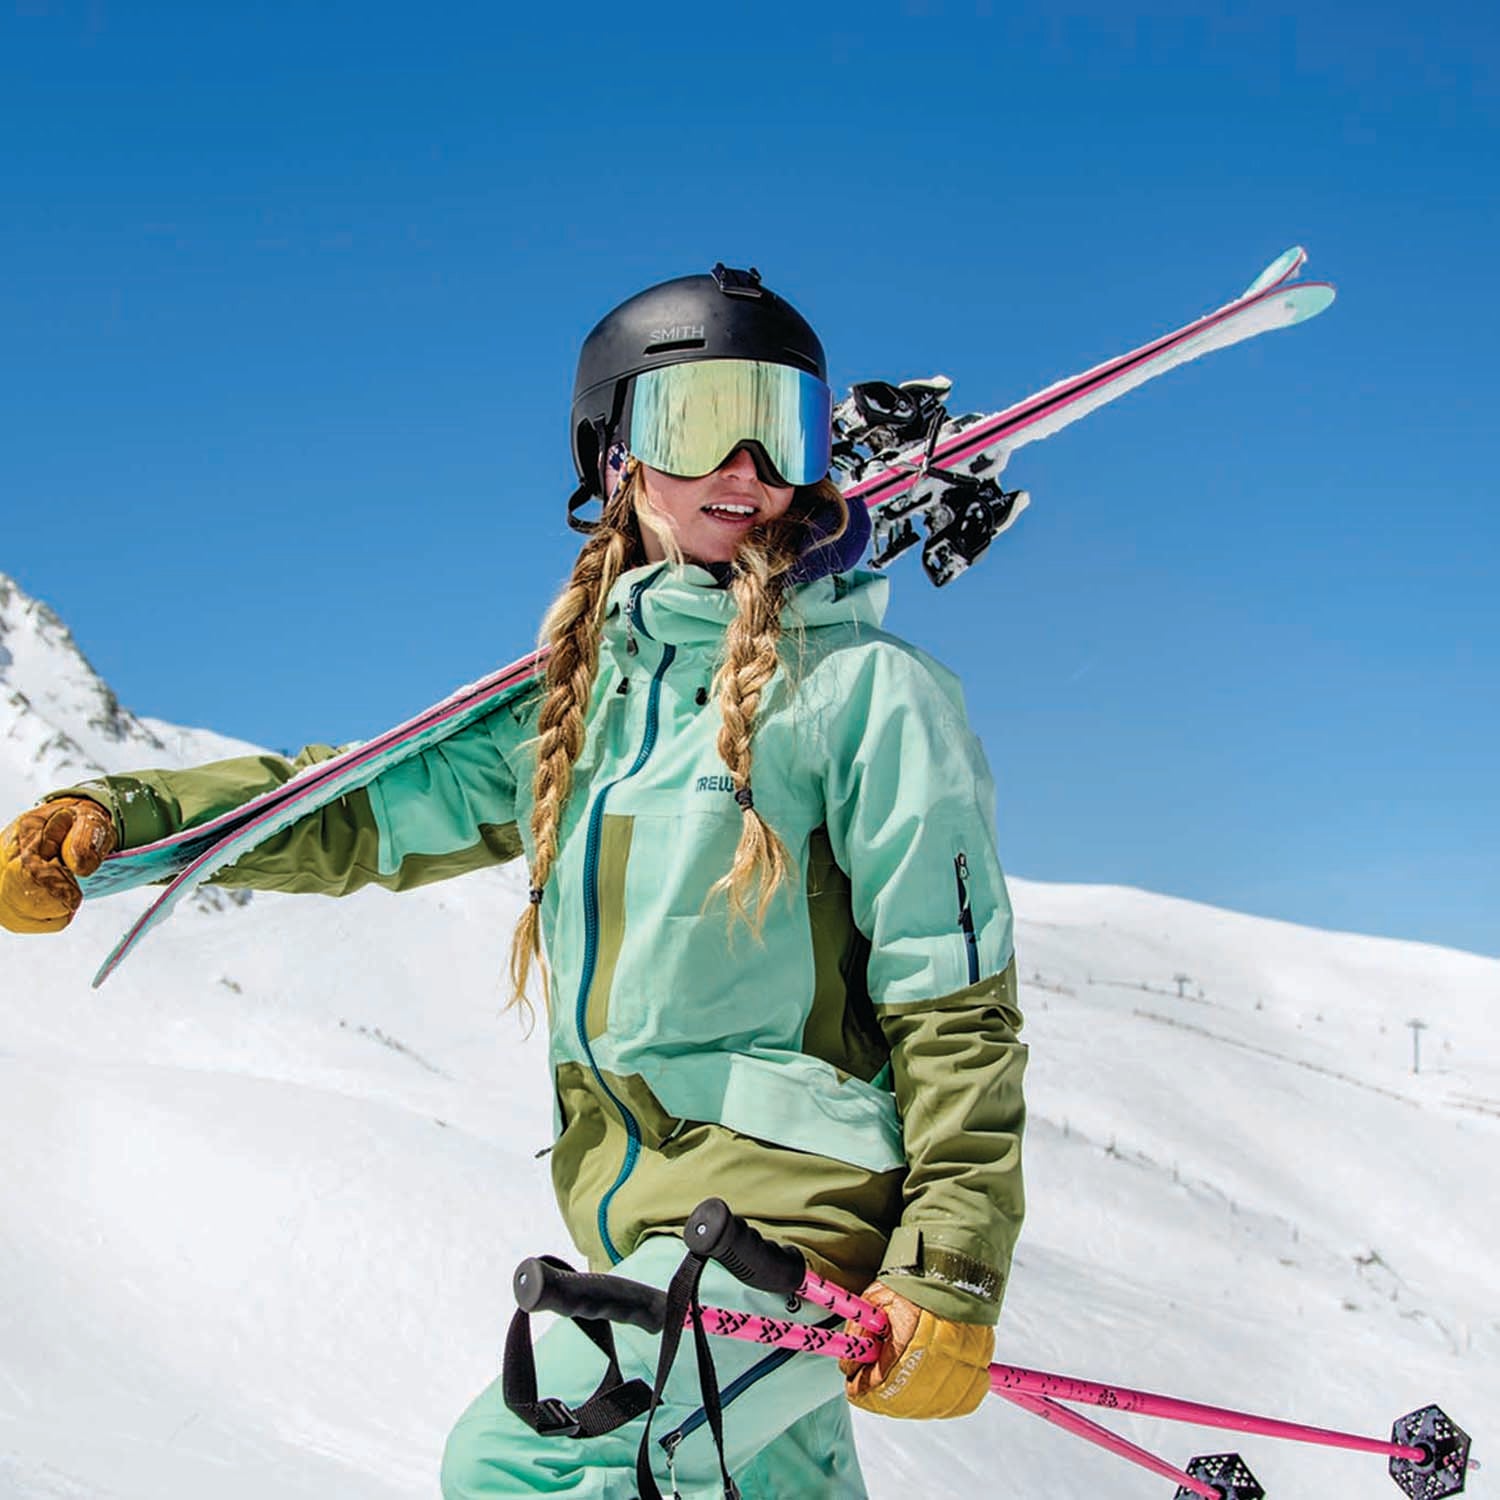 Women's Skiing Adventures with PowderQuest Tours